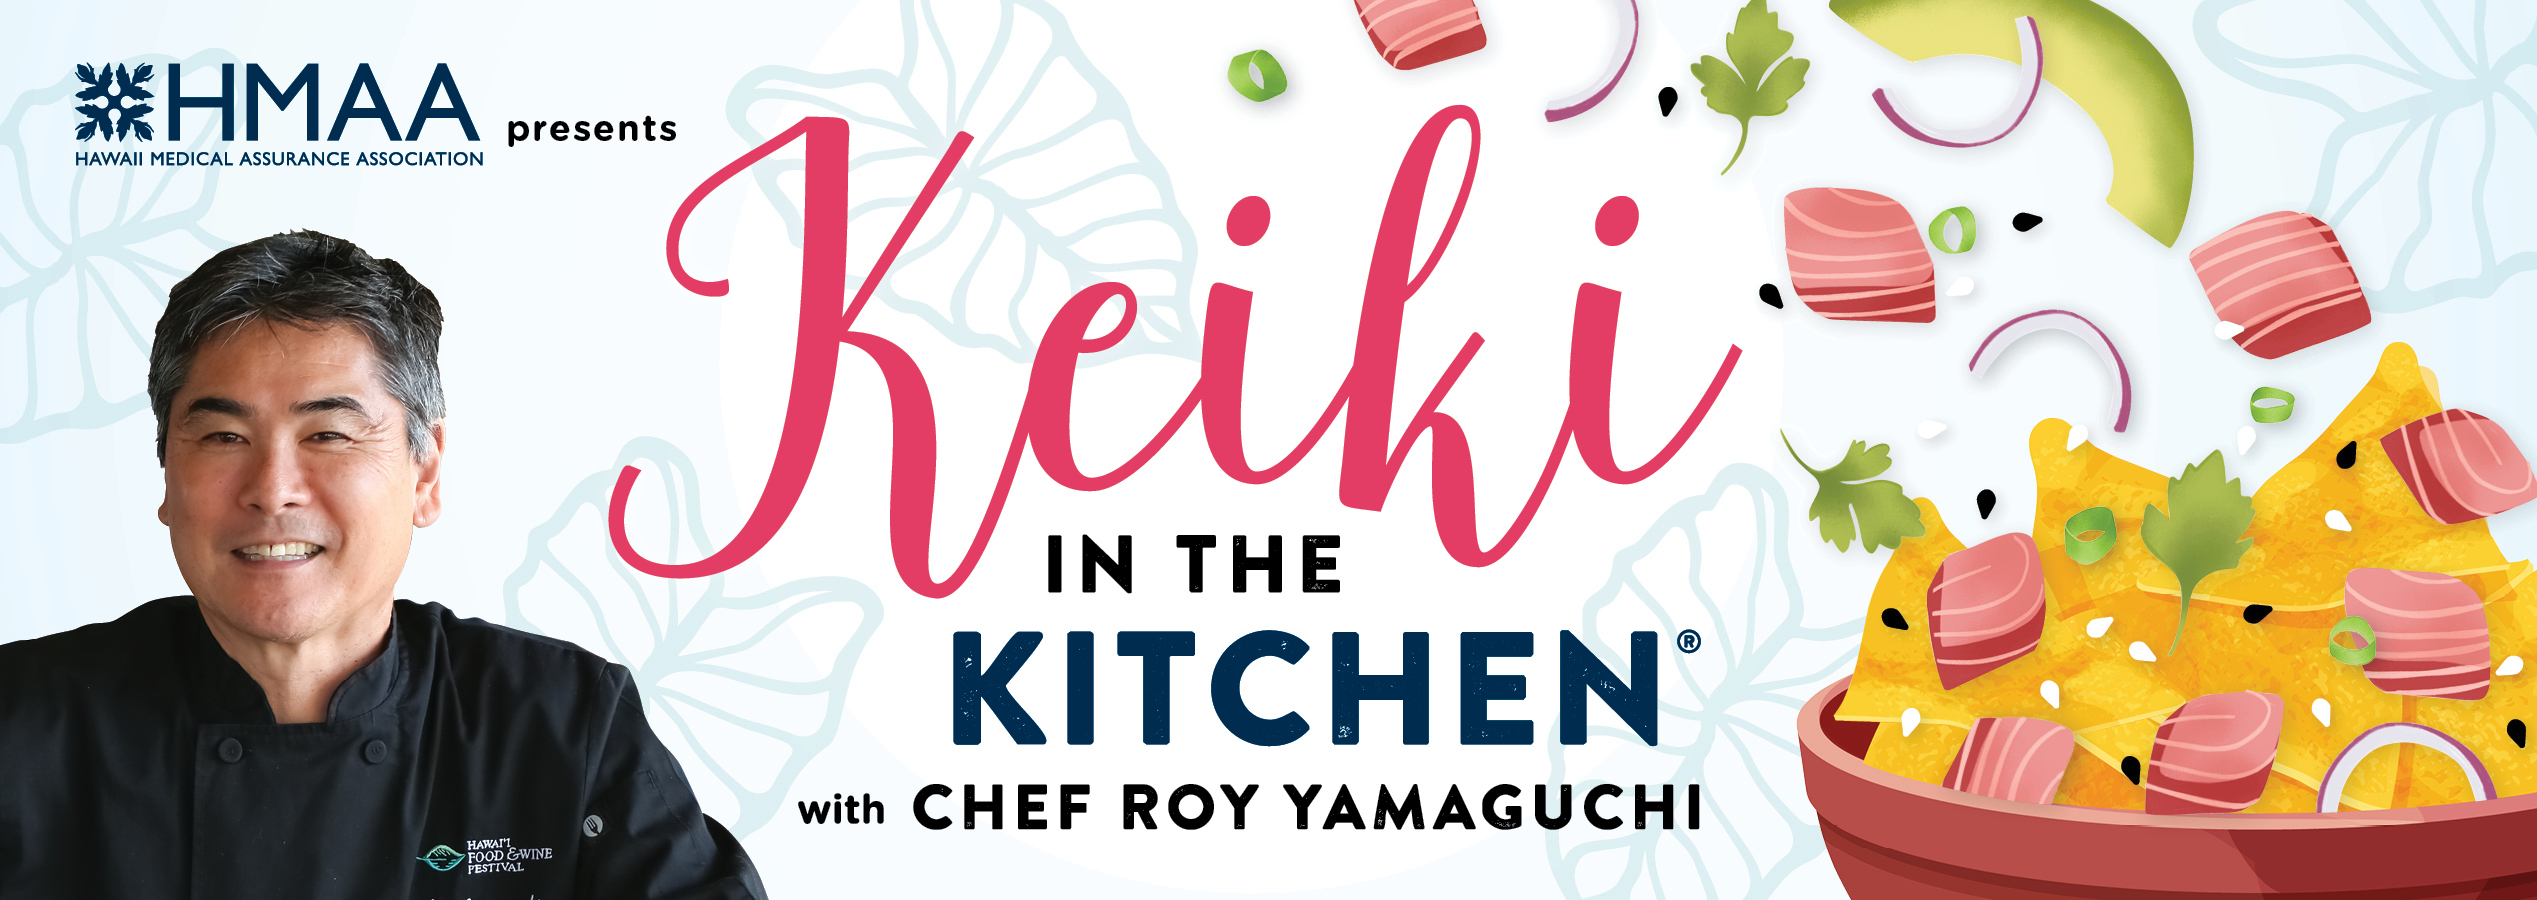 HMAA Presents Keiki in the Kitchen with Chef Roy Yamaguchi